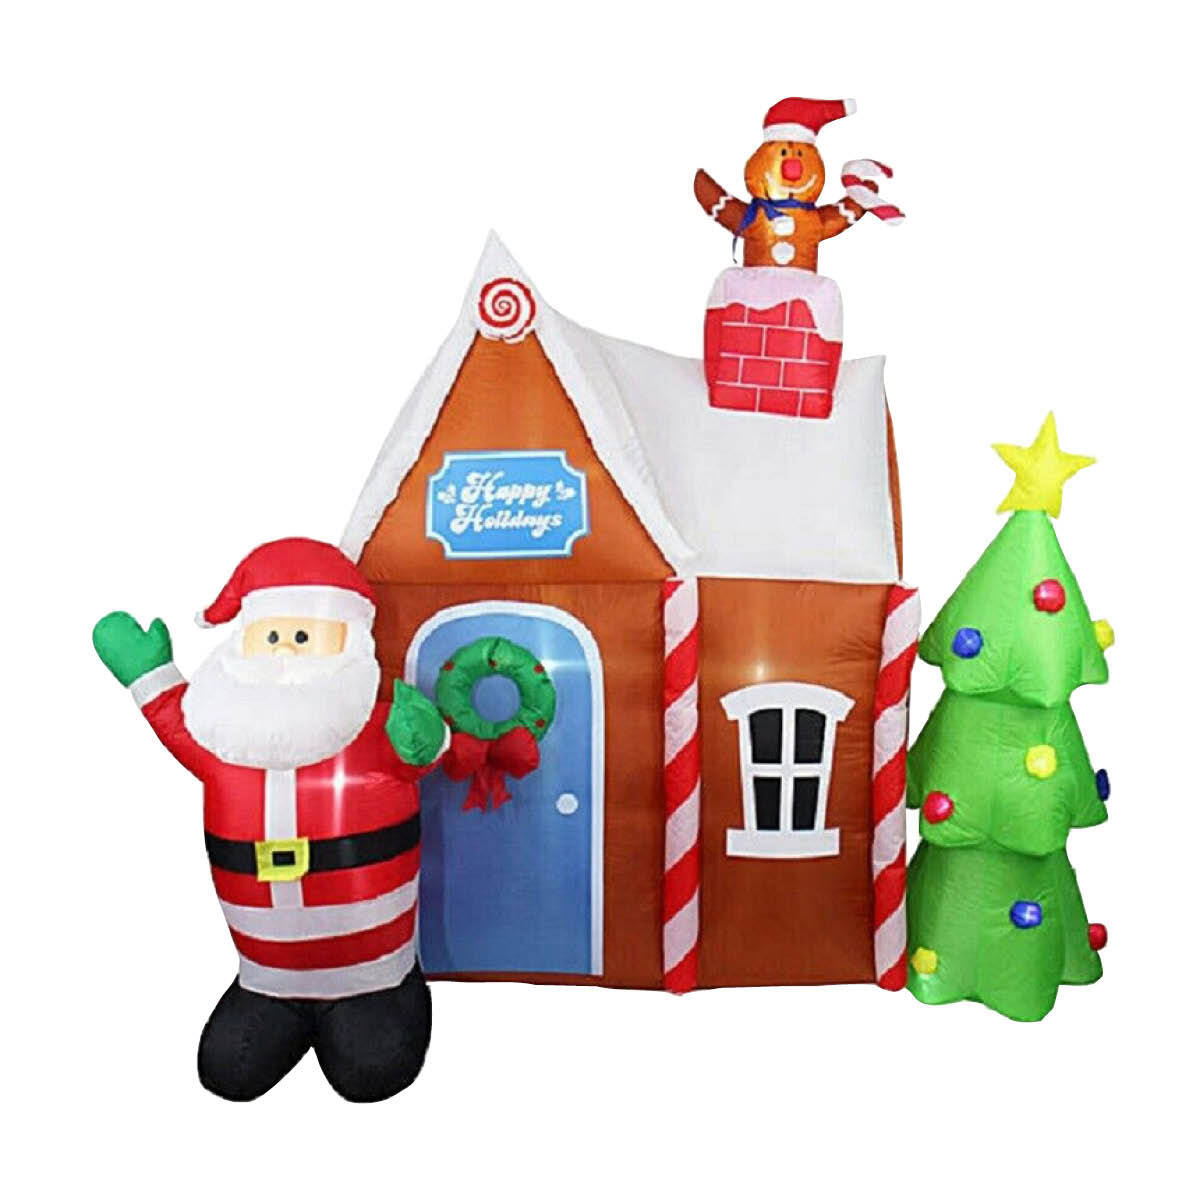 Christmas By Sas 2.2m Gingerbread House & Santa Self Inflating LED Lights Deals499